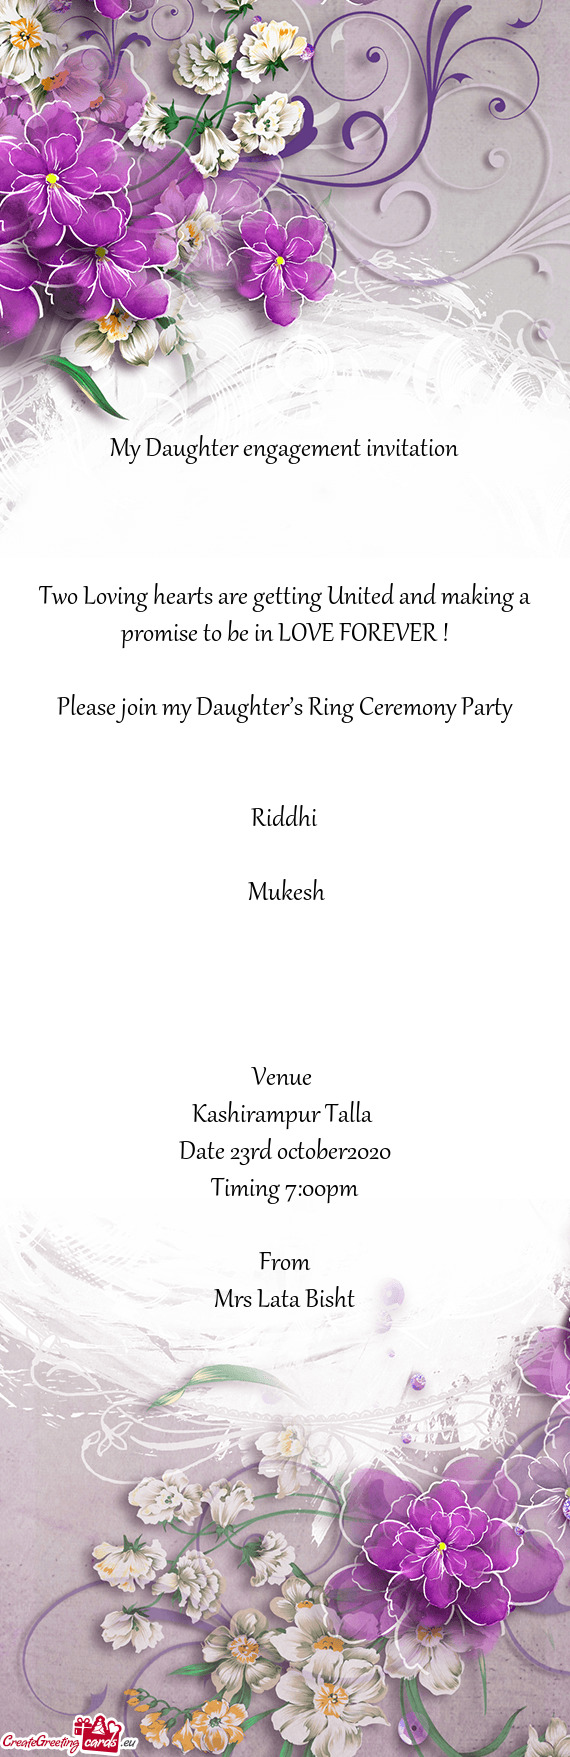 To be in LOVE FOREVER !
 
 Please join my Daughter’s Ring Ceremony Party
 
 
 Riddhi
 ❤
 Mukesh